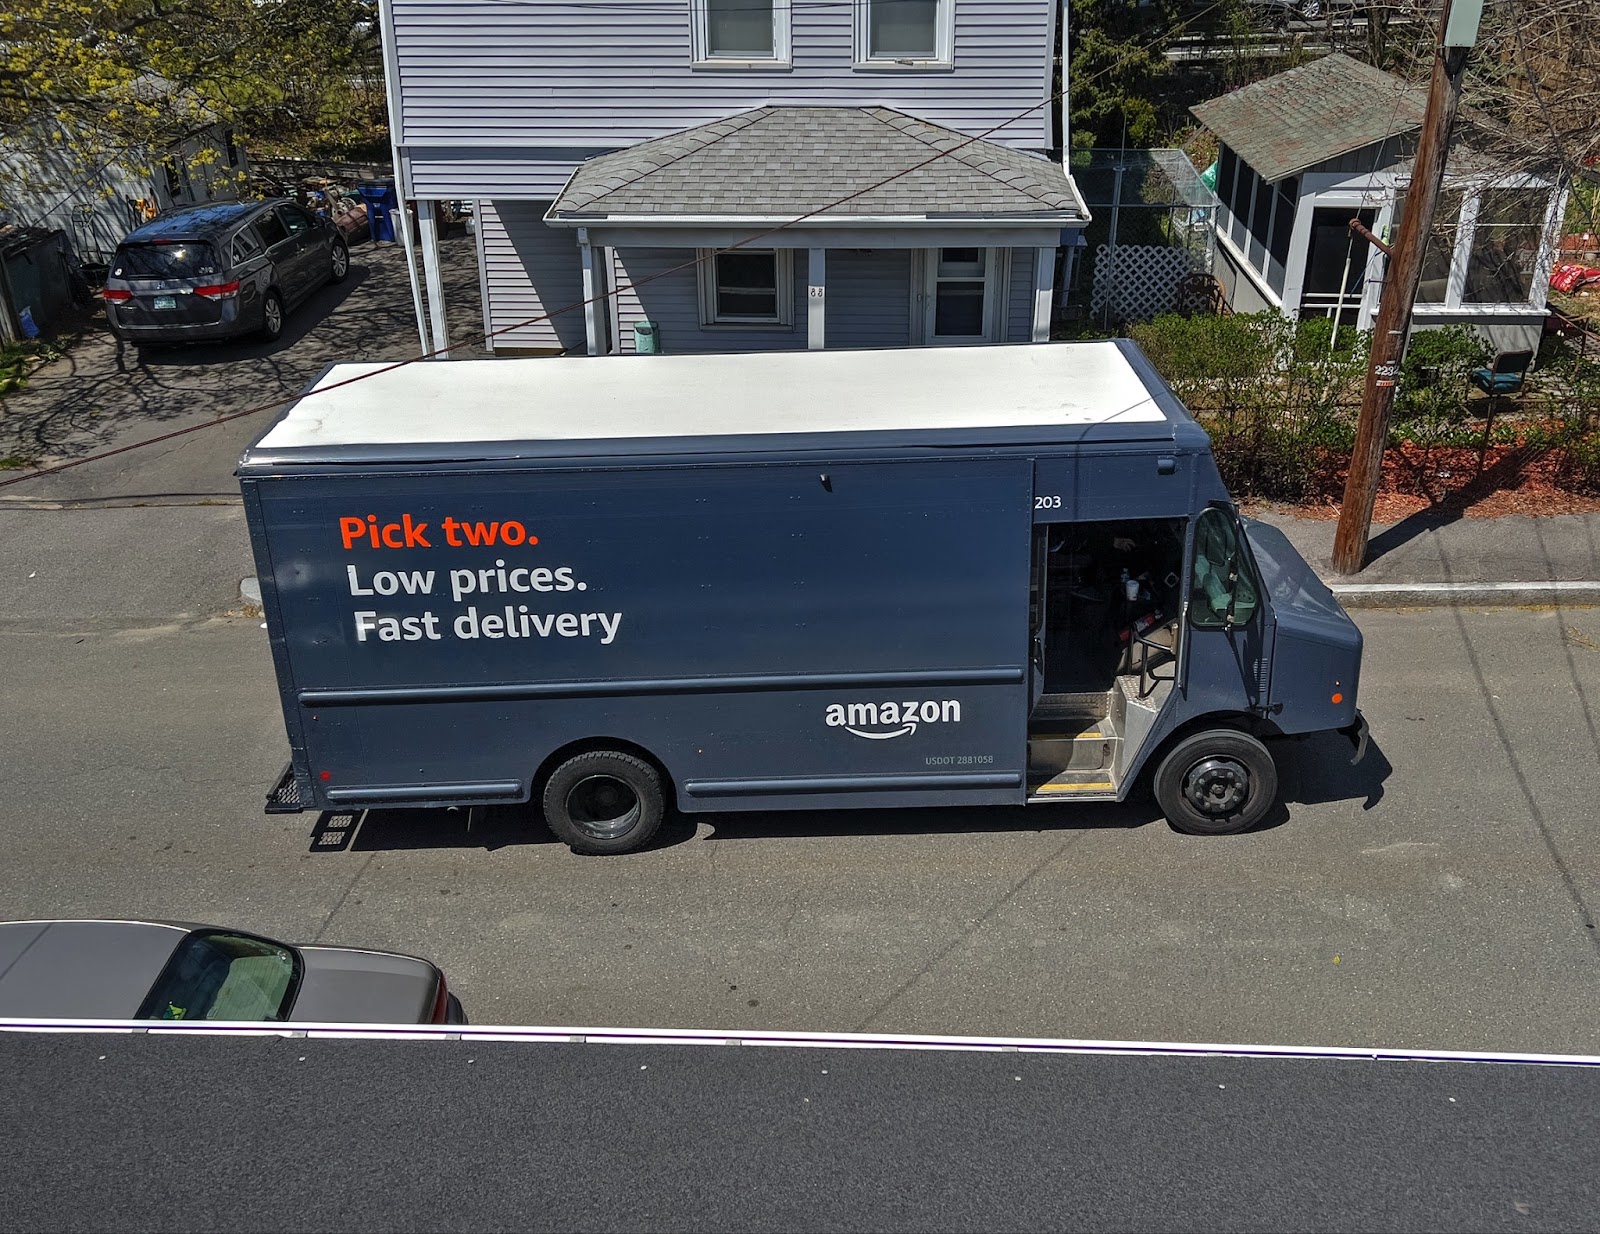 an Amazon Prime delivery truck on the street